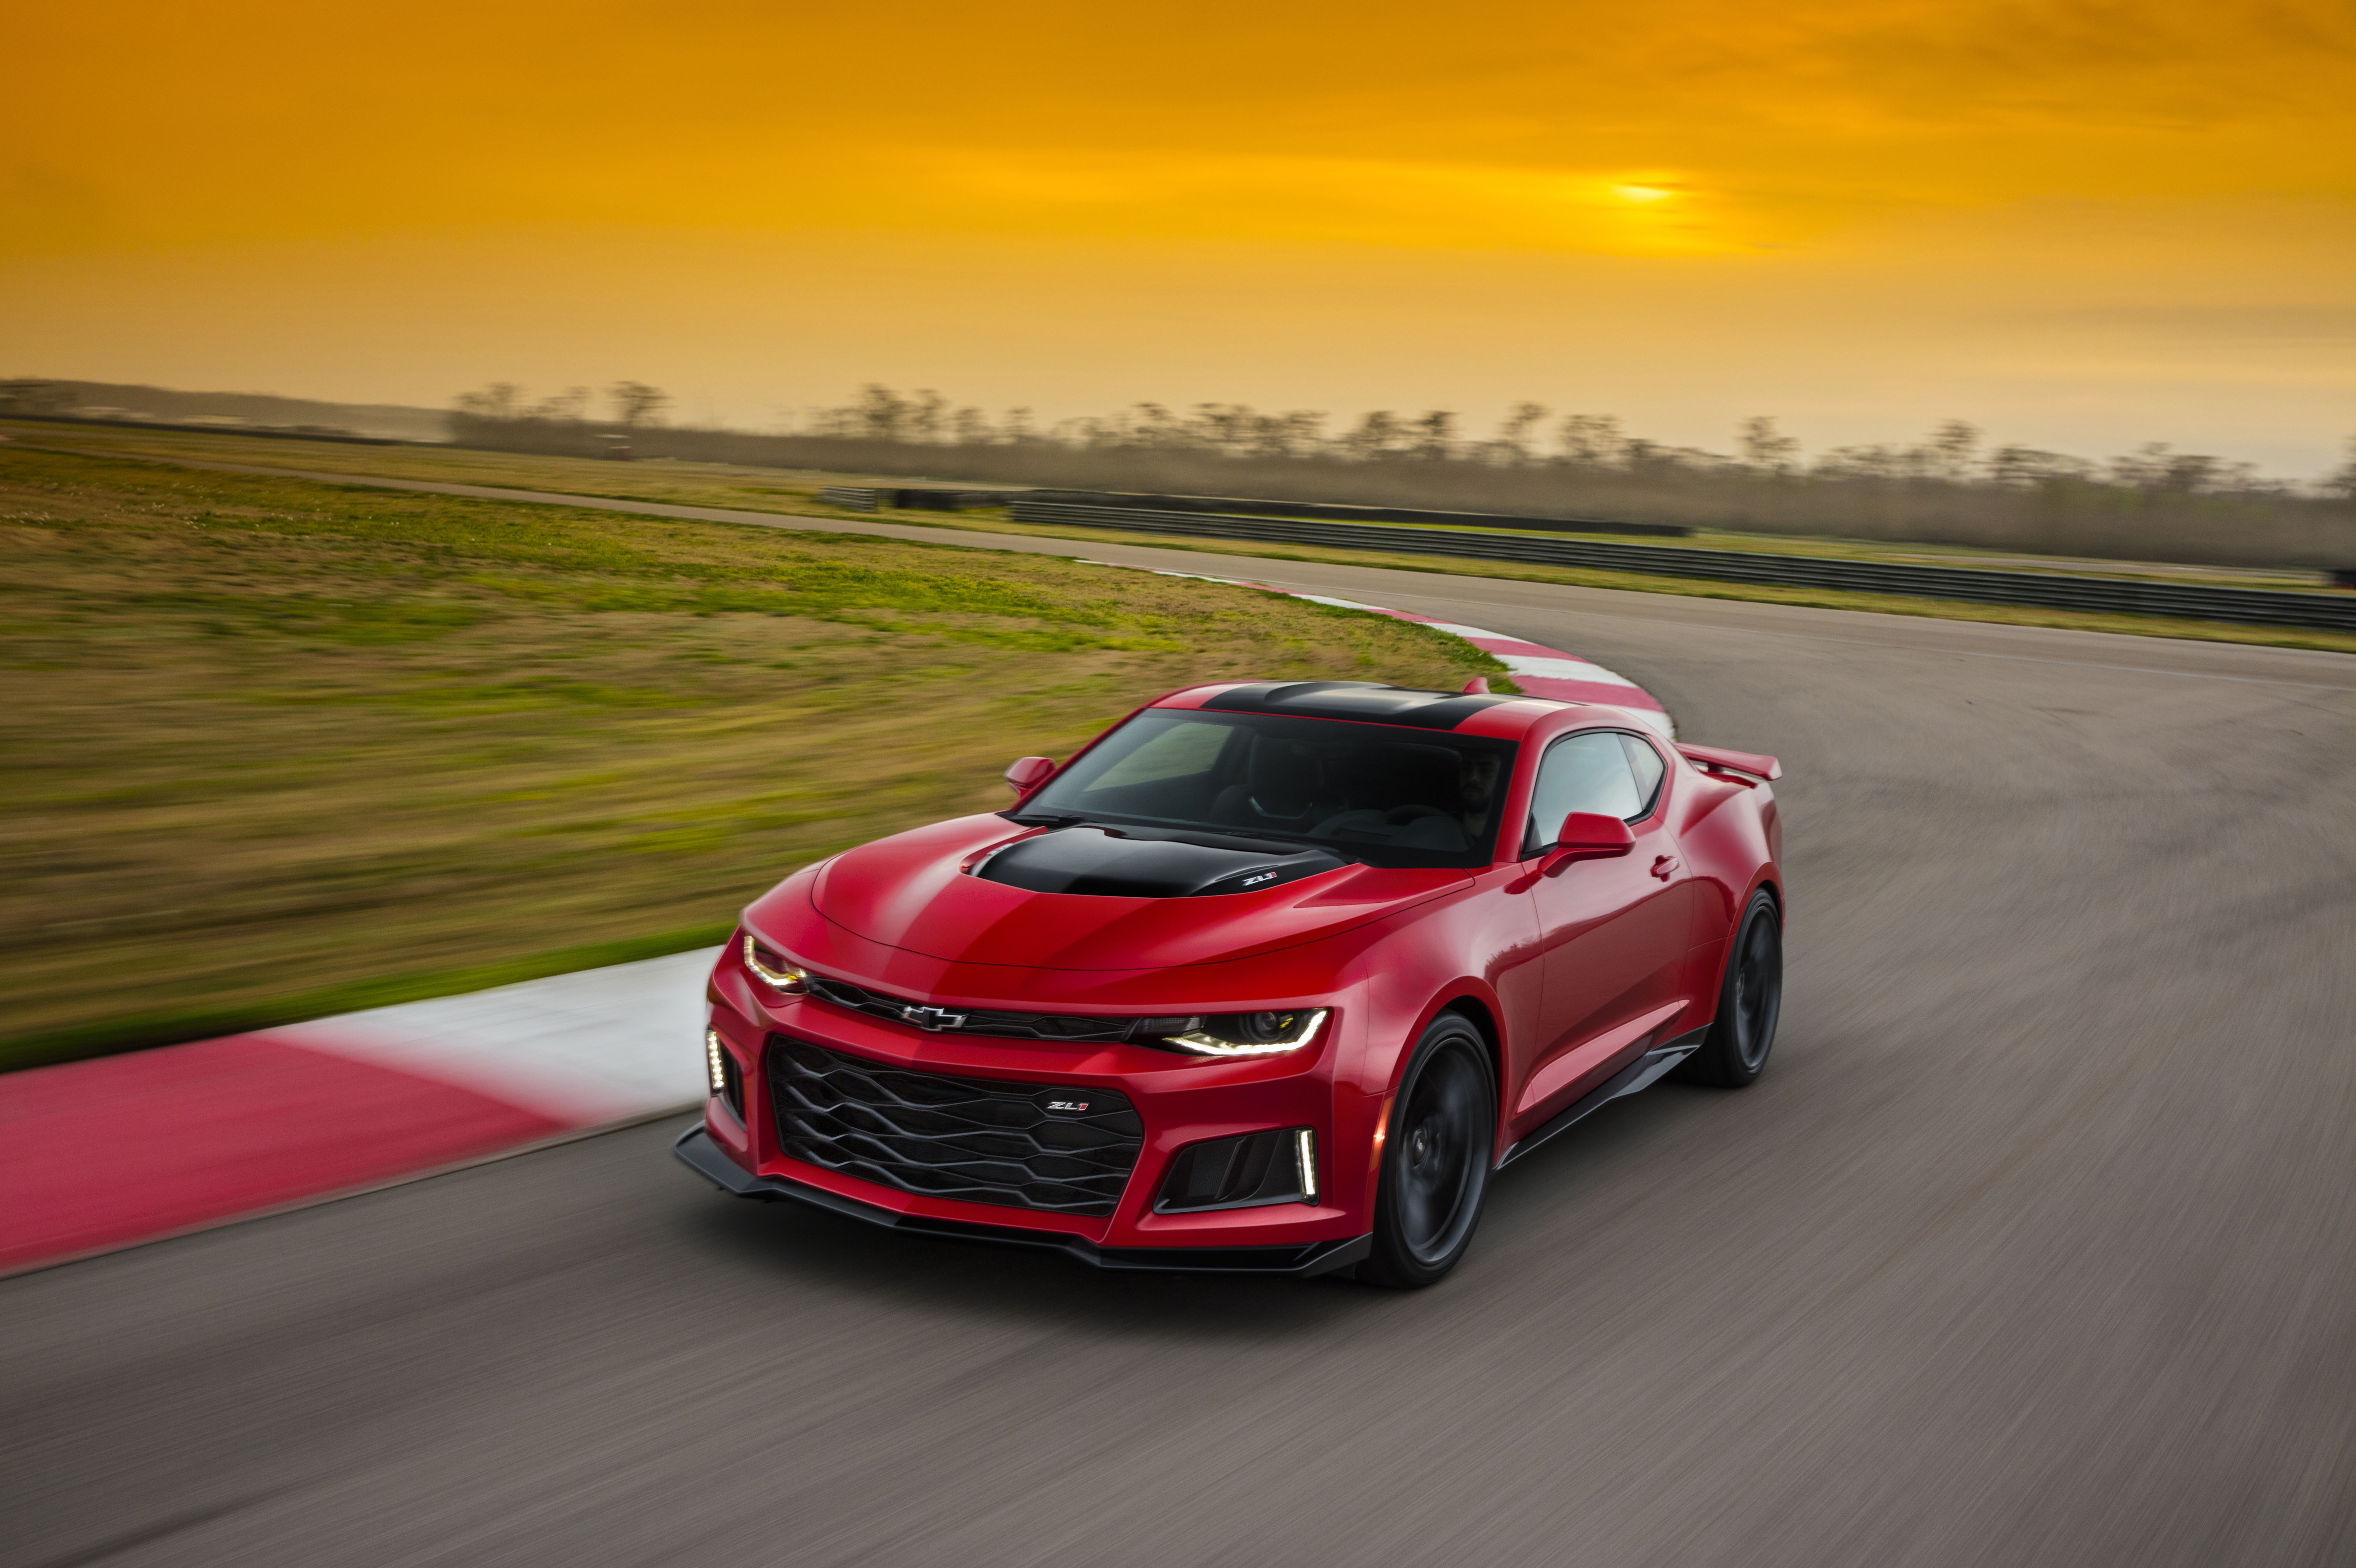 Lease a Chevrolet Camaro in the Bay Area